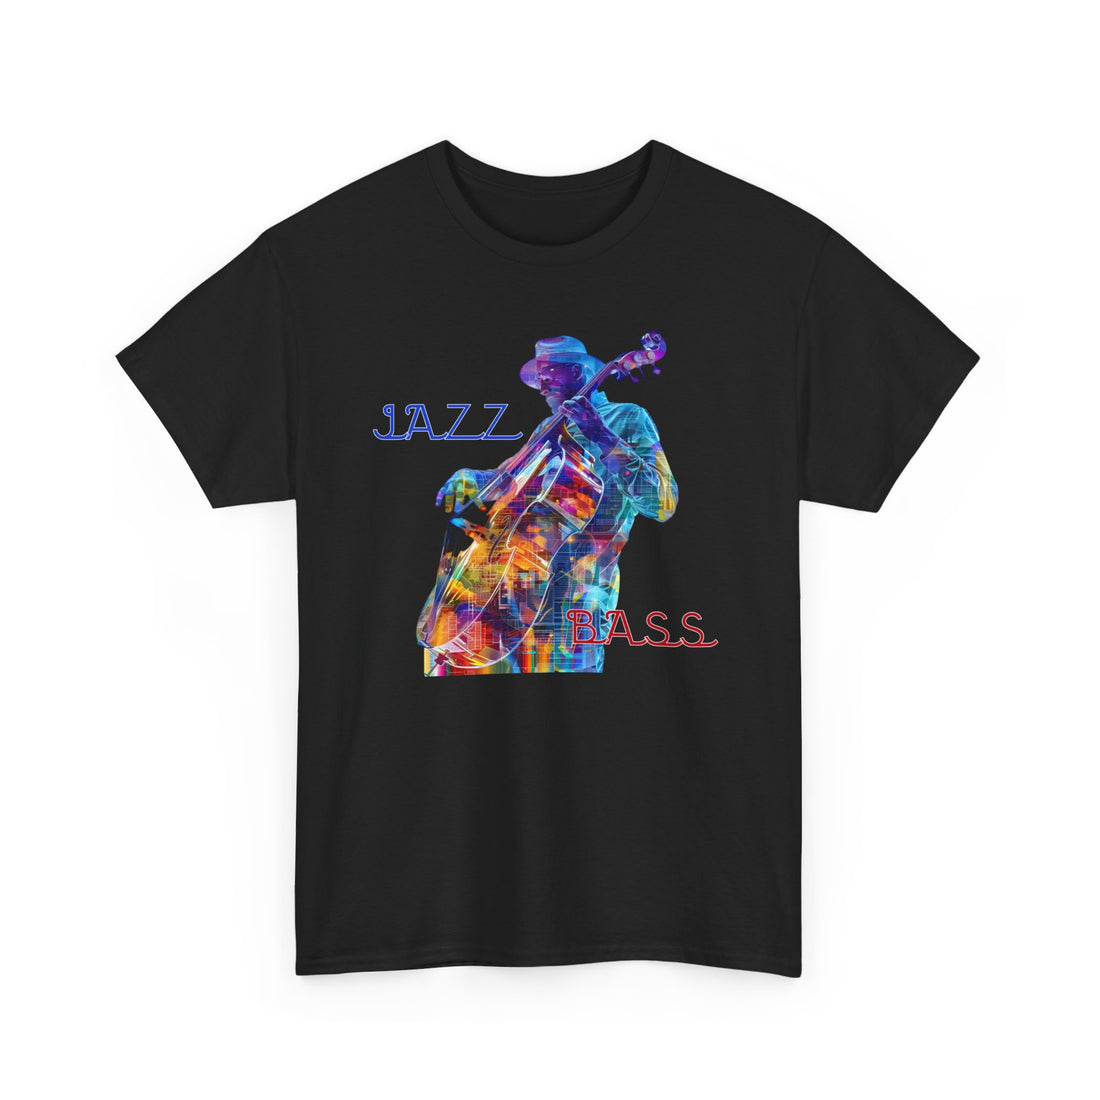 A black t shirt with an upright bass player image. The image has an unusual font saying ‘Jazz Bass’